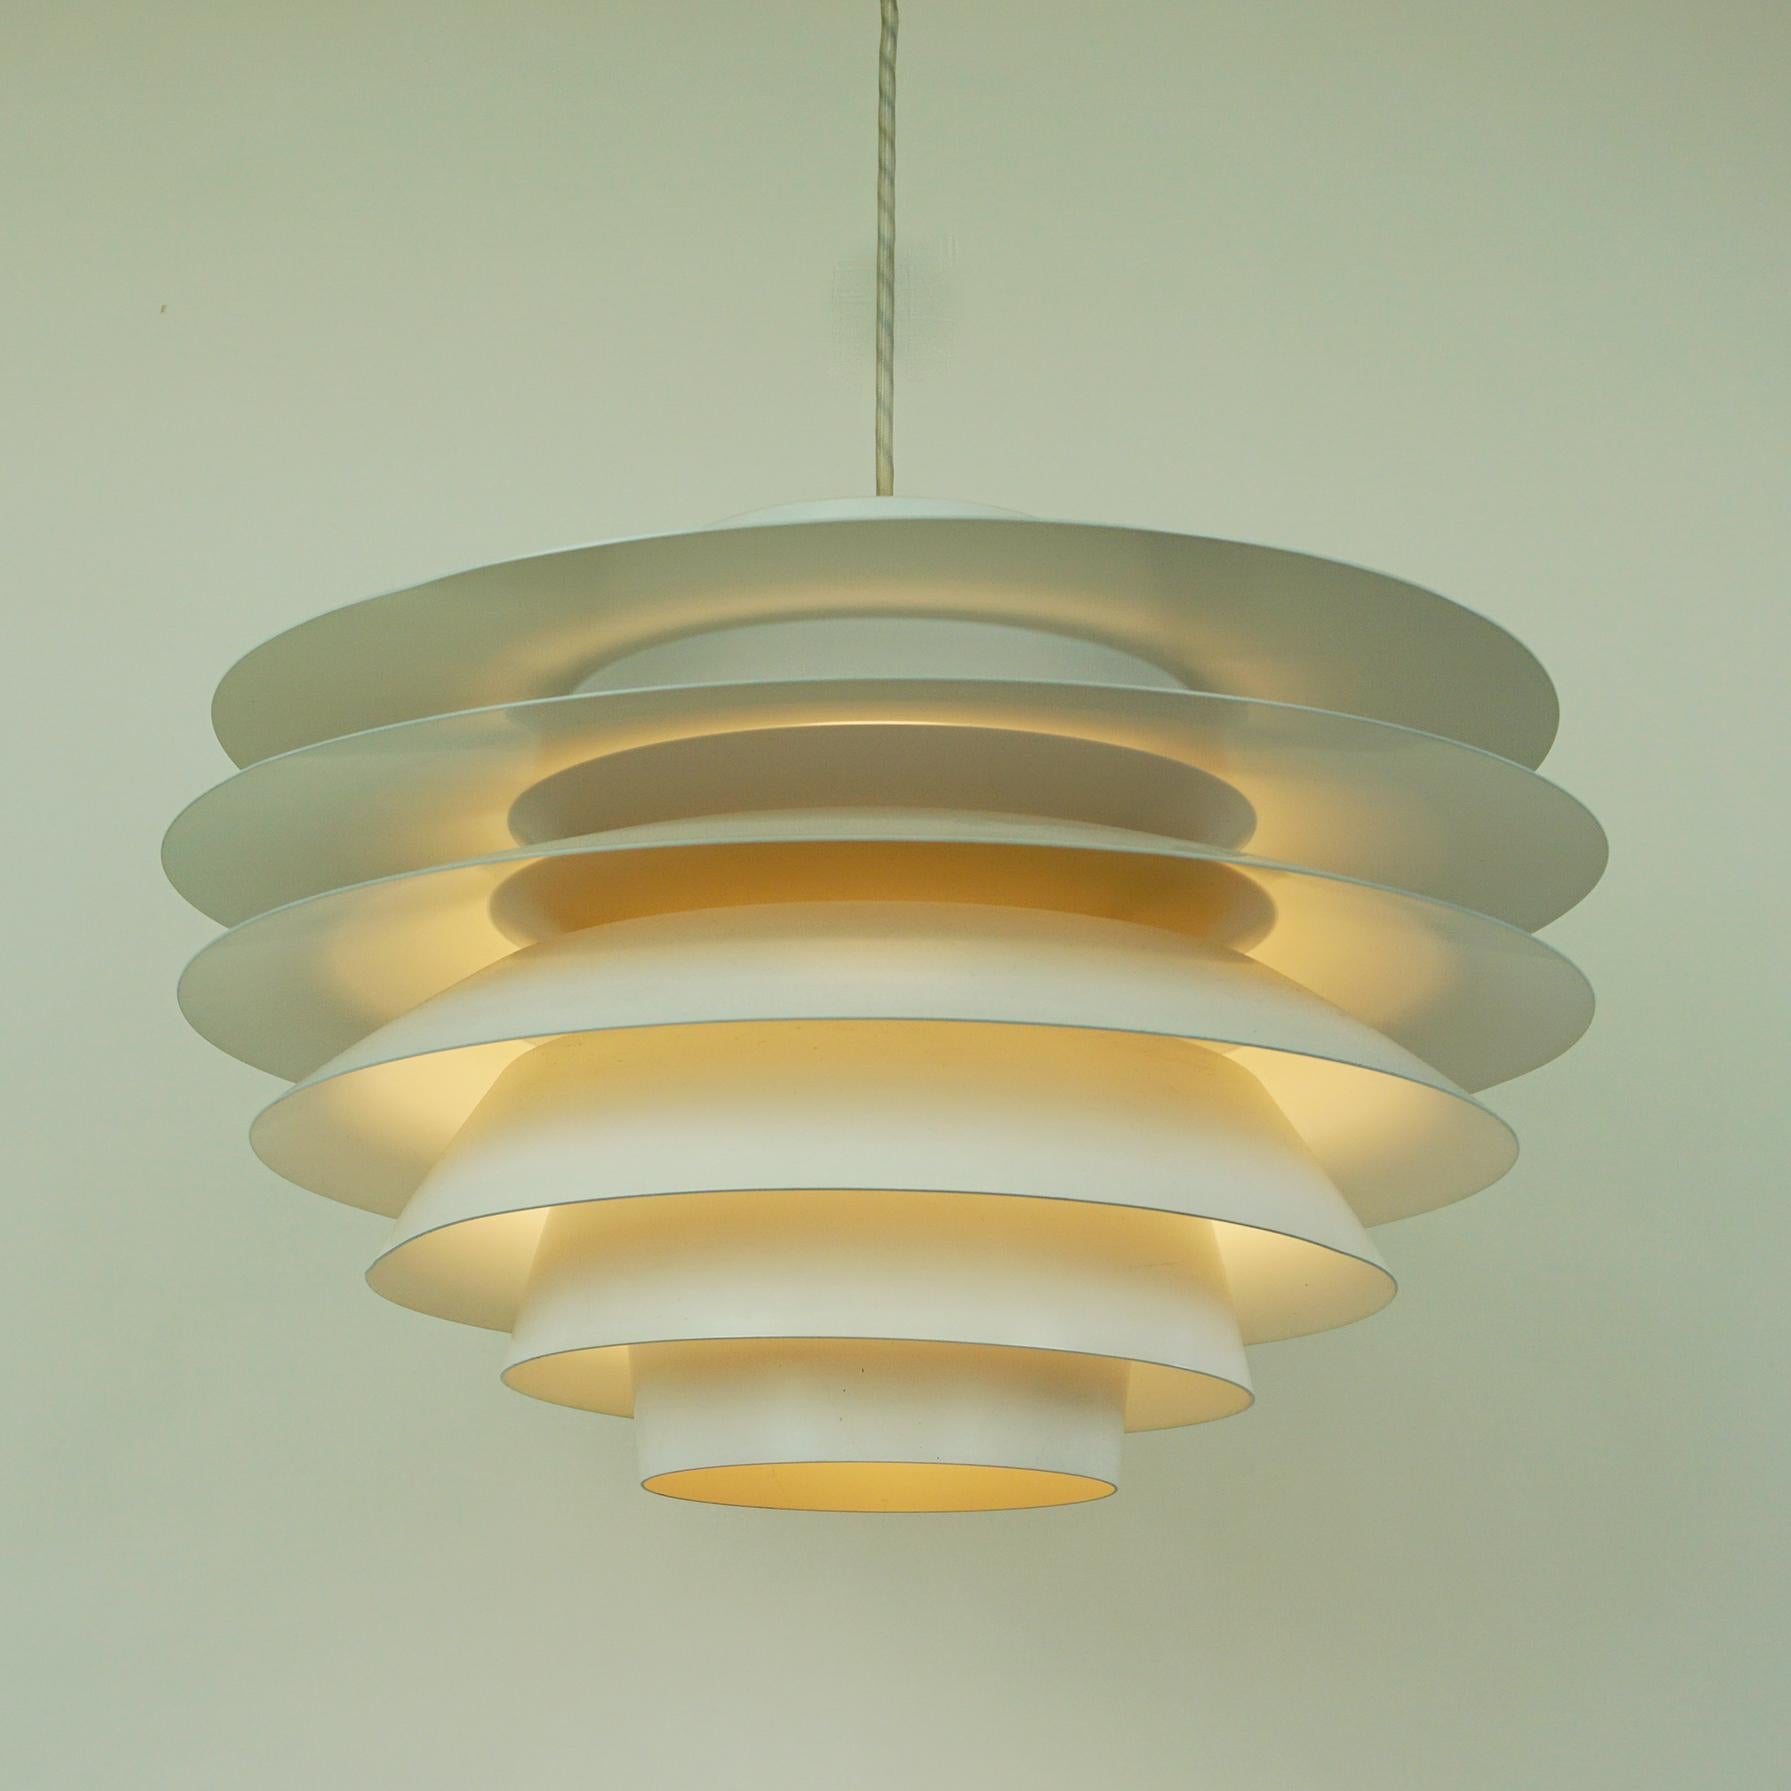 Fantastic large white lacquered Svend Middelboe pendant. Model Verona, number 42029. This pendant light is produced by Nordisk Solar in Denmark. The lamp has a partly gray interior and accommodates maximum 300 watt bulbs. Constructed from tiers of